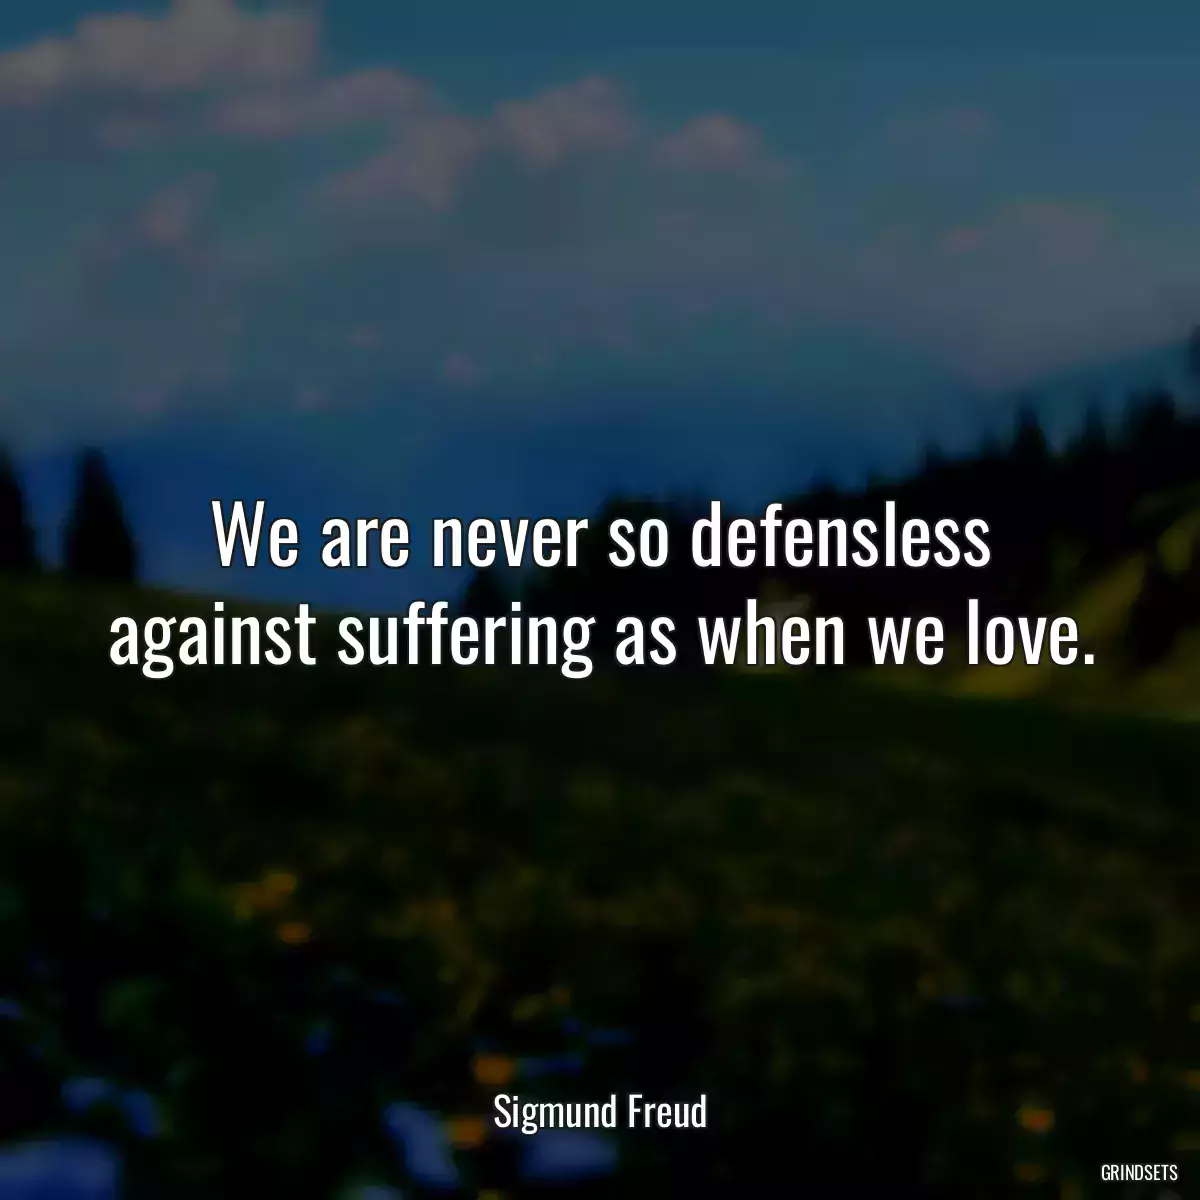 We are never so defensless against suffering as when we love.